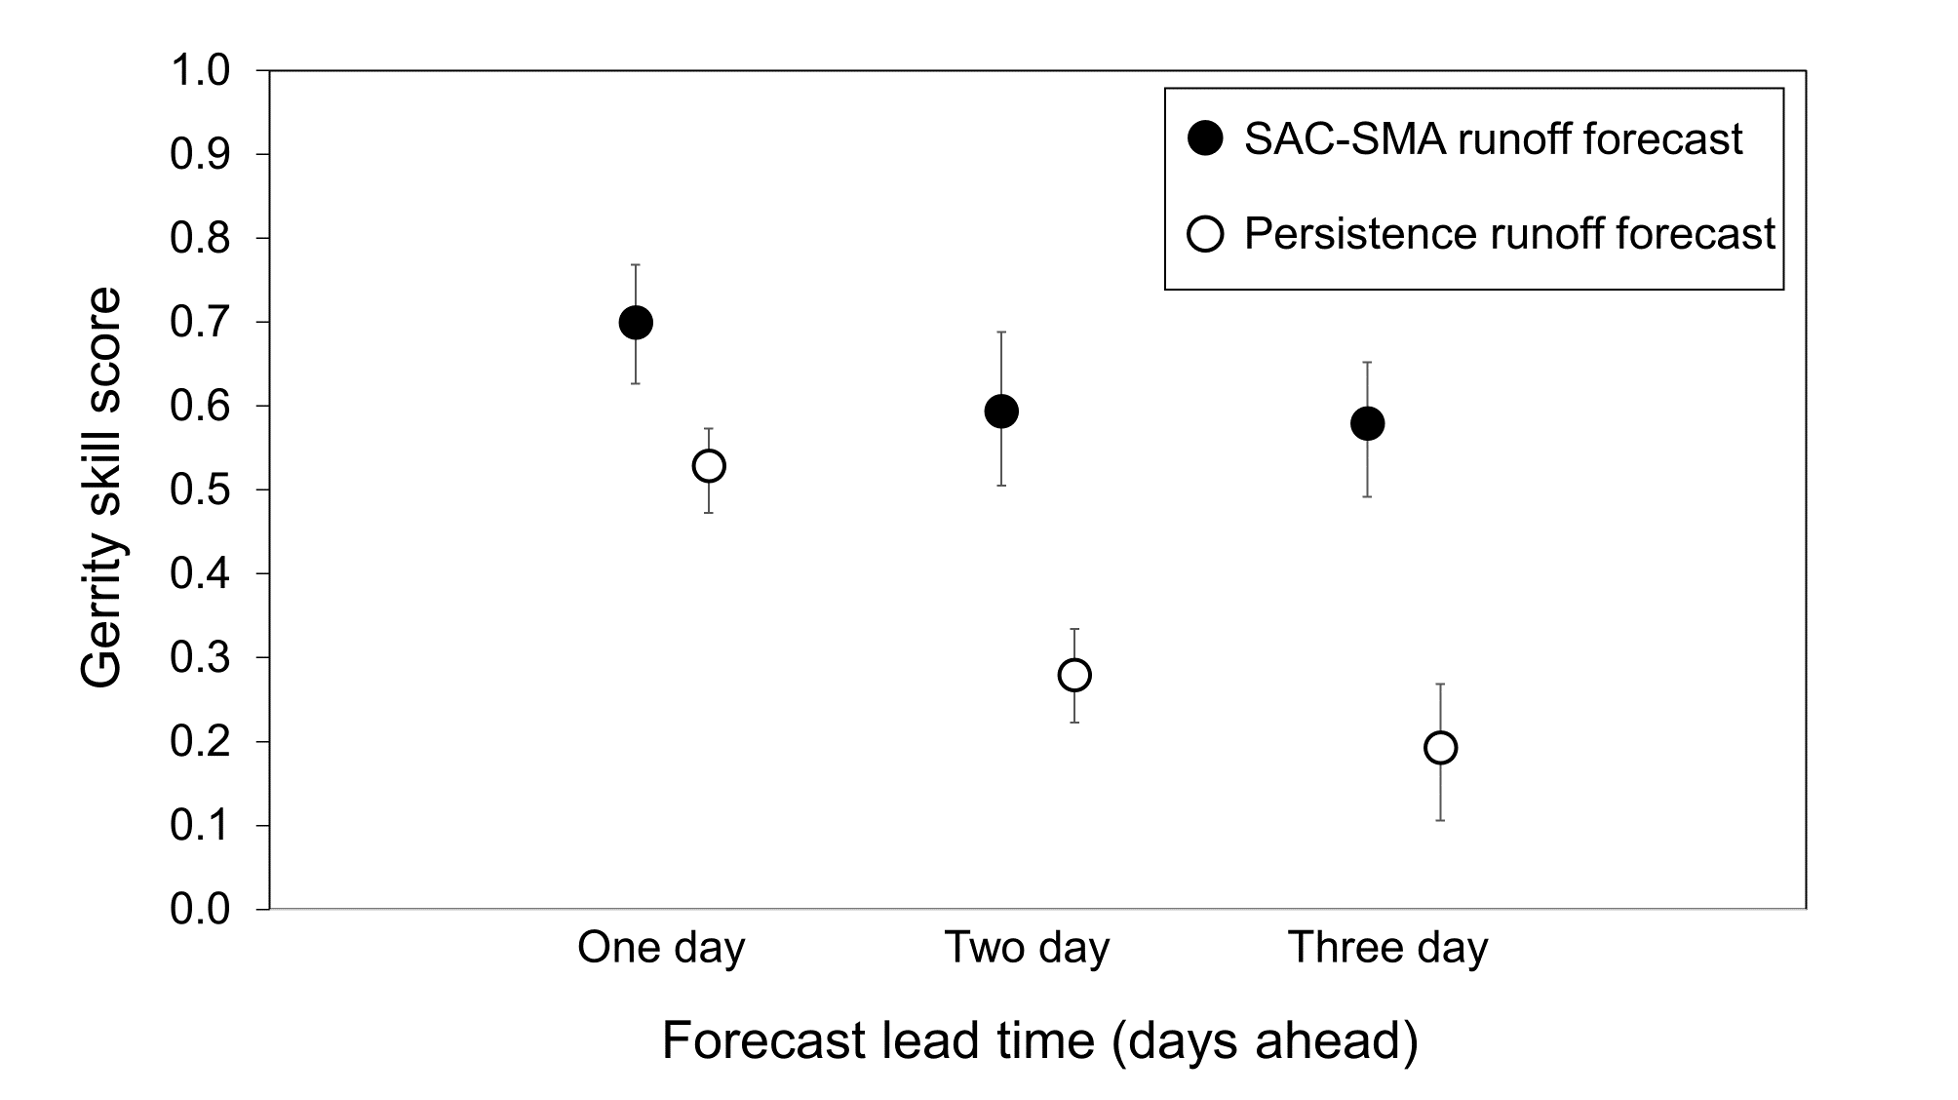 Figure 4: Gerrity skill scores for one-day, two-day, and three-day runoff forecasts issued by SAC-SMA and persistence in Mahantango Creek. For each lead time, the point indicates the value of the Gerrity Skill Score, while the 95% confidence intervals indicate the uncertainty surrounding each value. 